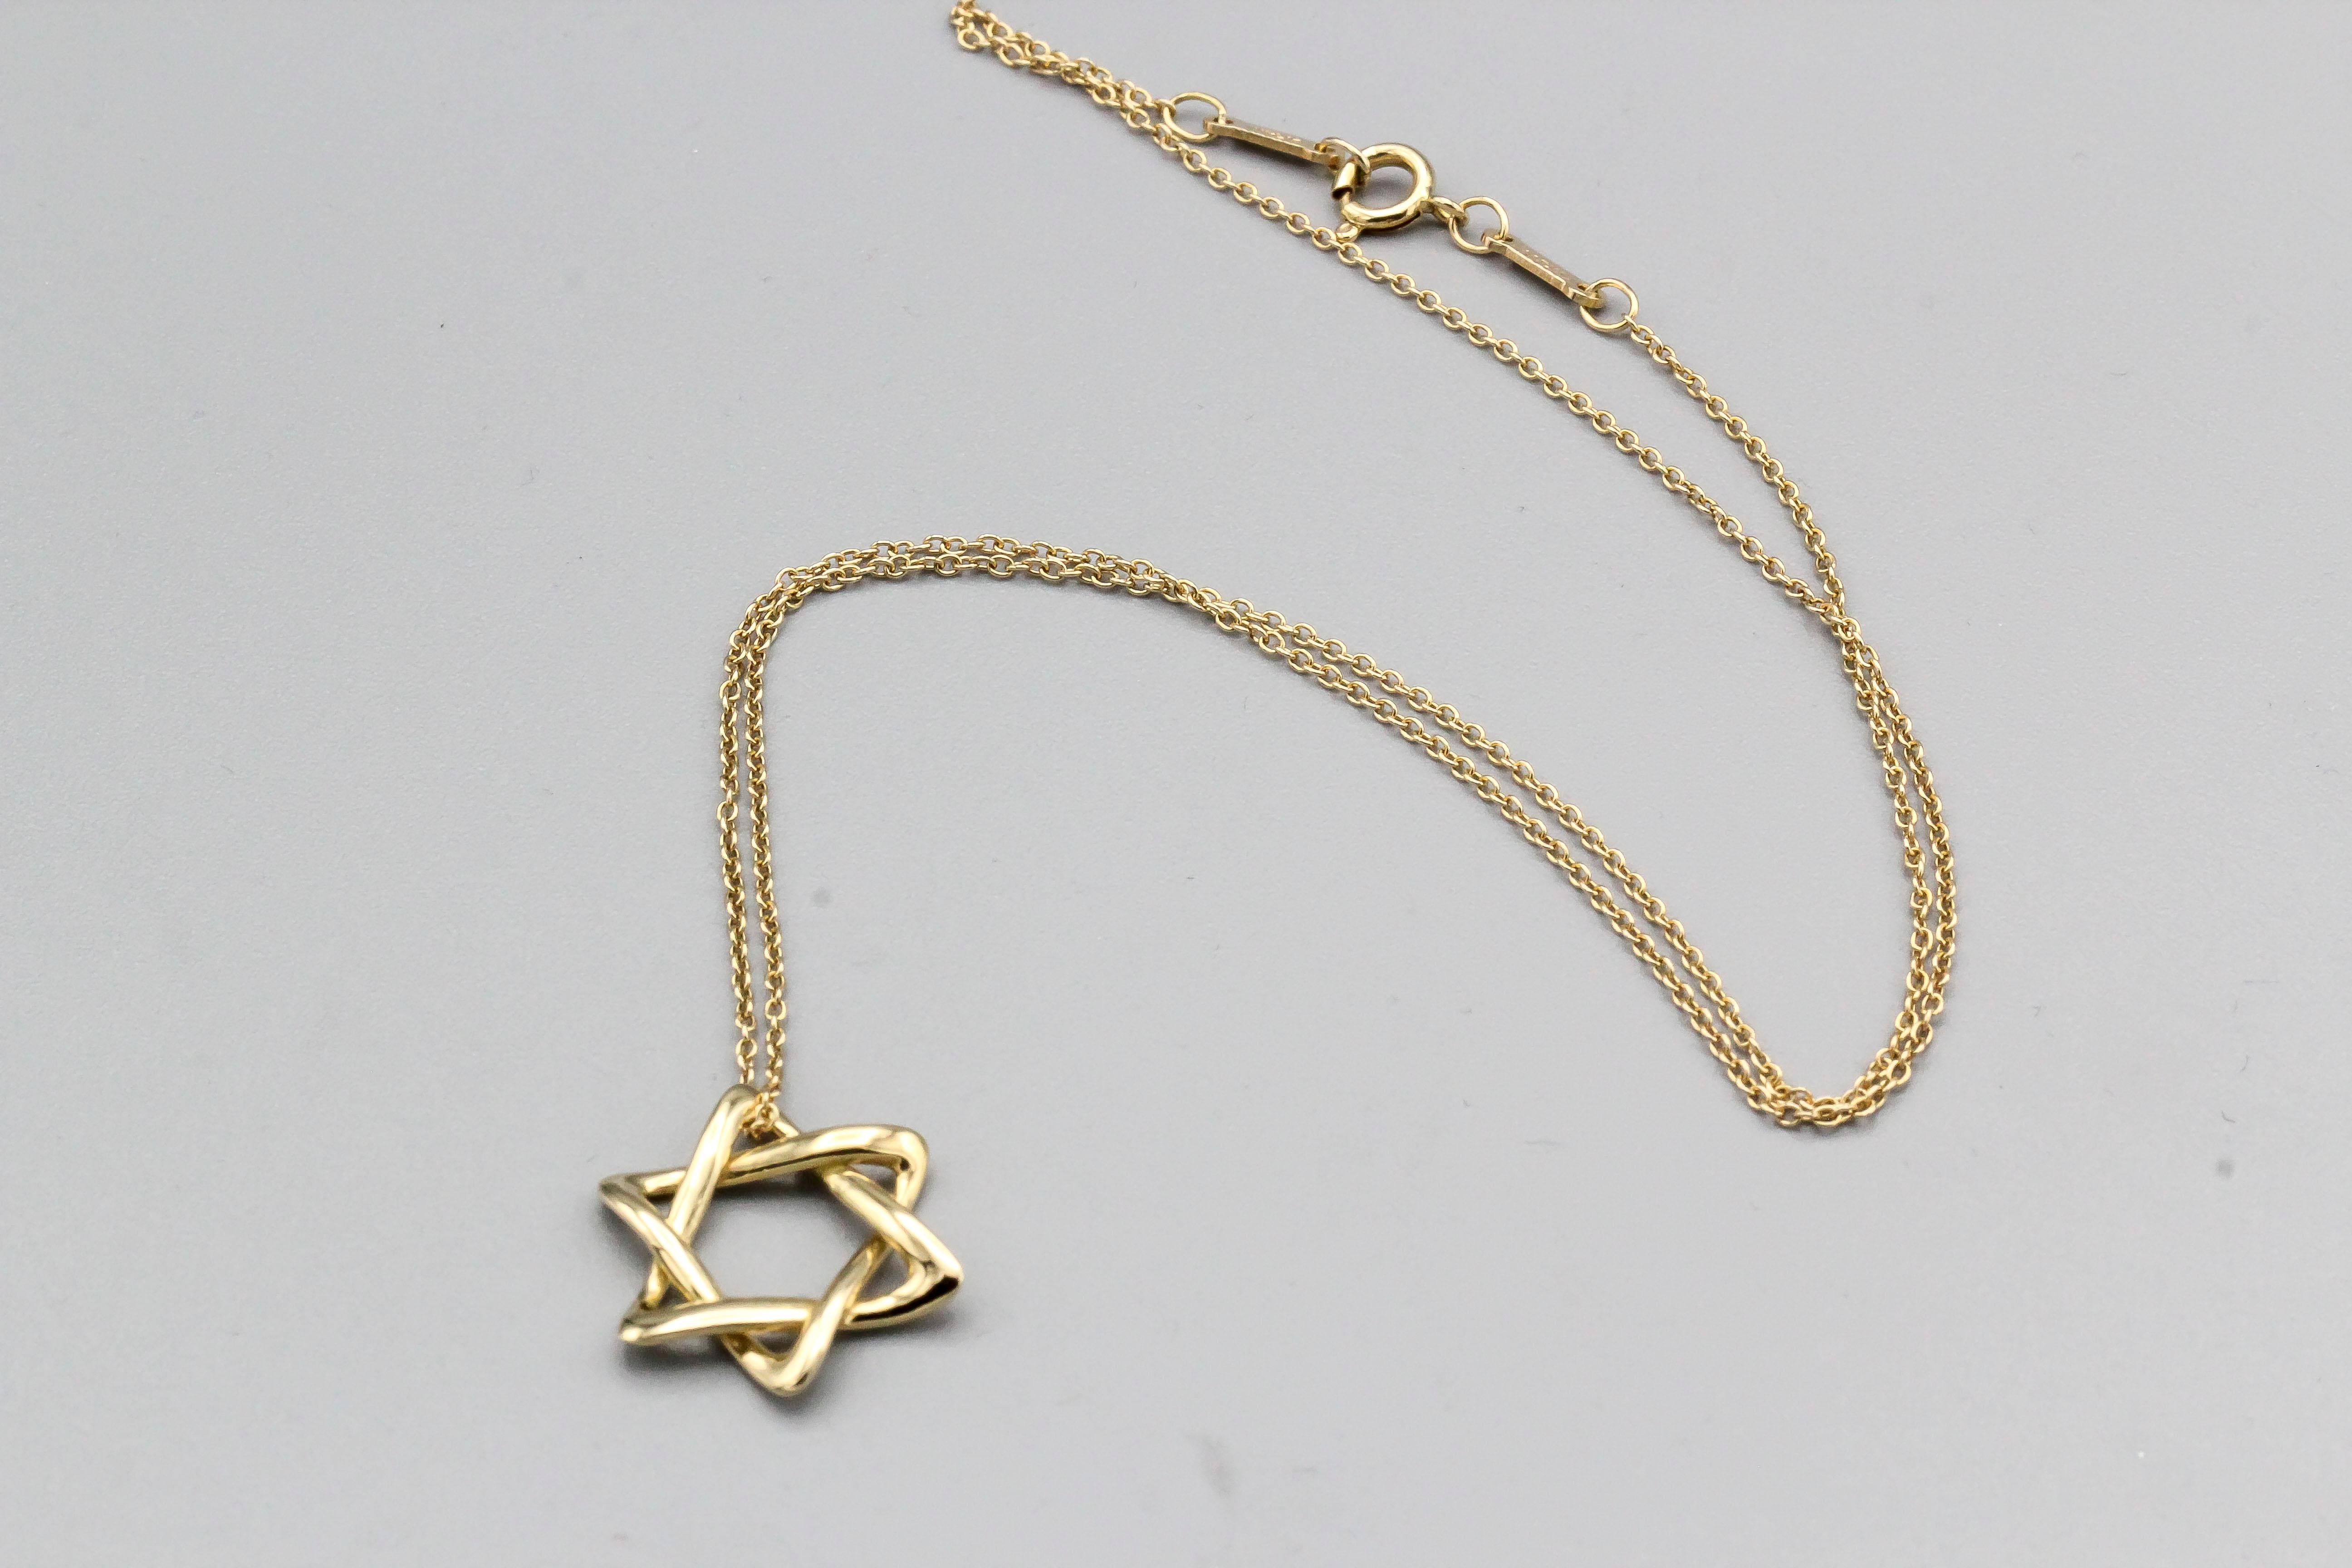 Fine 18K yellow gold David's Star necklace by Tiffany & Co., Elsa Peretti. This is the larger of two sizes and currently retails for $1425. Chain length is 16